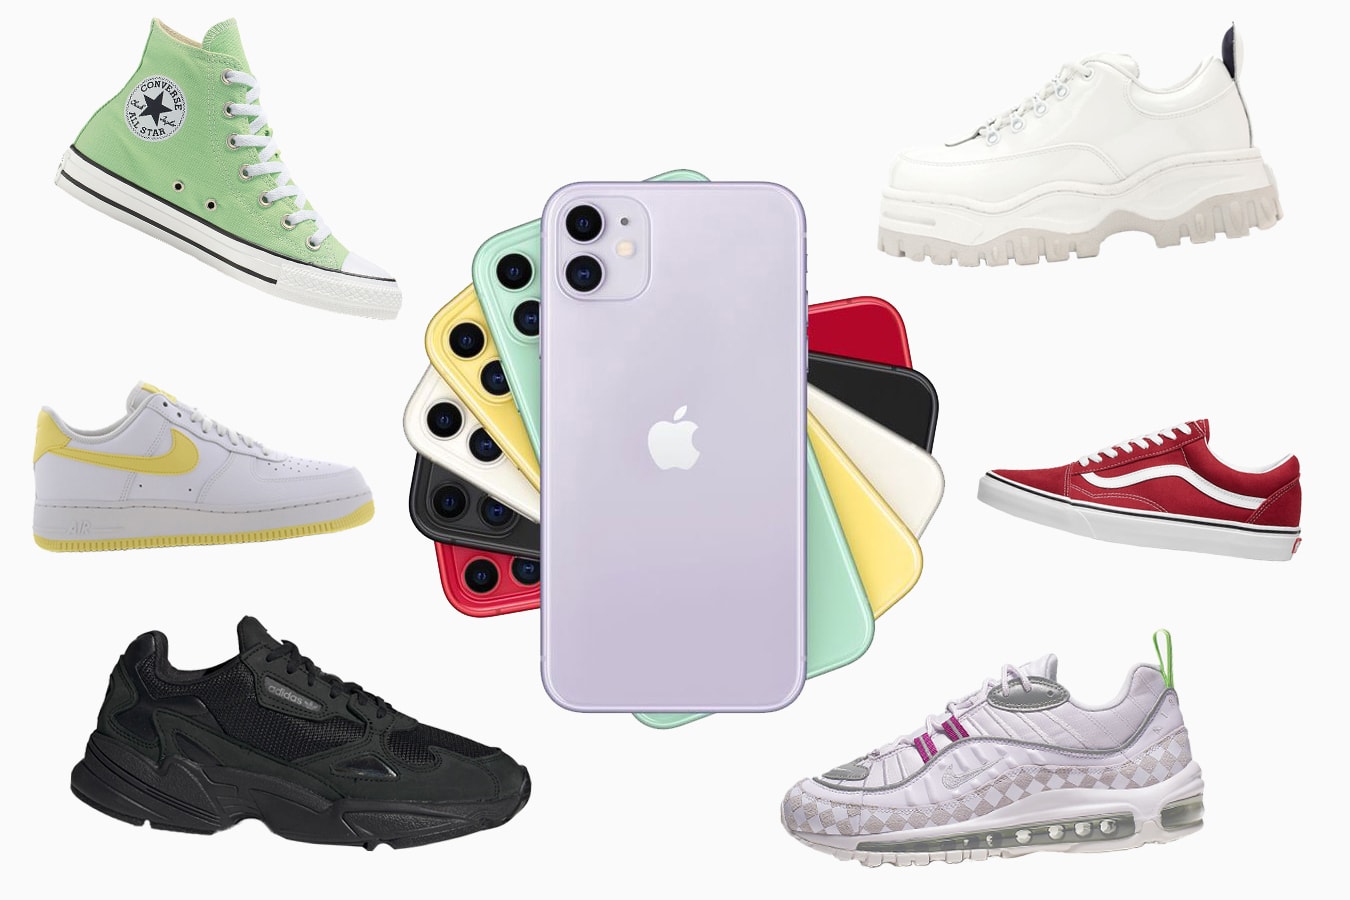 Apple iPhone 11 Matching Sneaker Colors Purple Green Yellow Pastel Red Black White Product(Red) Vans Old Skool Nike Air Max 98 Air Force 1 adidas Originals Falcon Eytys Angel Converse chuck taylor all star